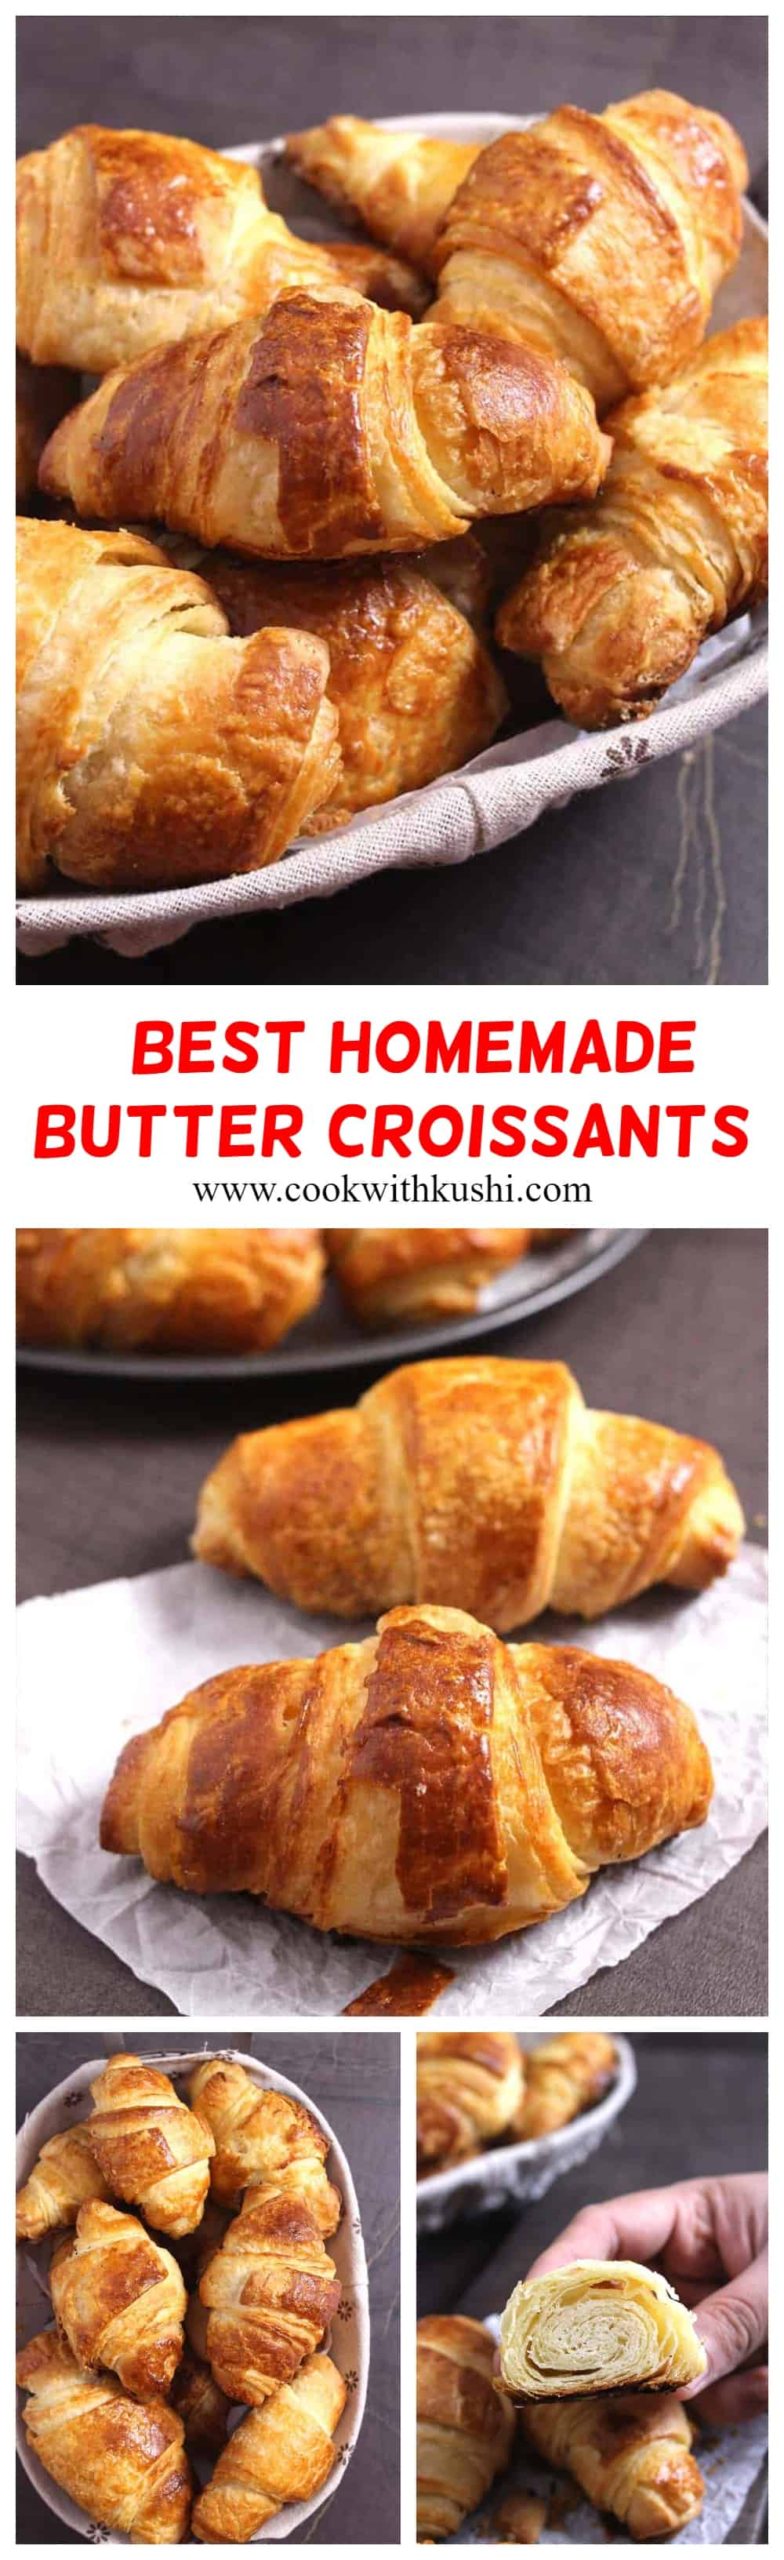 These homemade butter croissants are classic and rich, crispy and flaky that will make your morning breakfast or mid day snack extra delicious. #croissant #pastries #french #parisian #viennoiserie